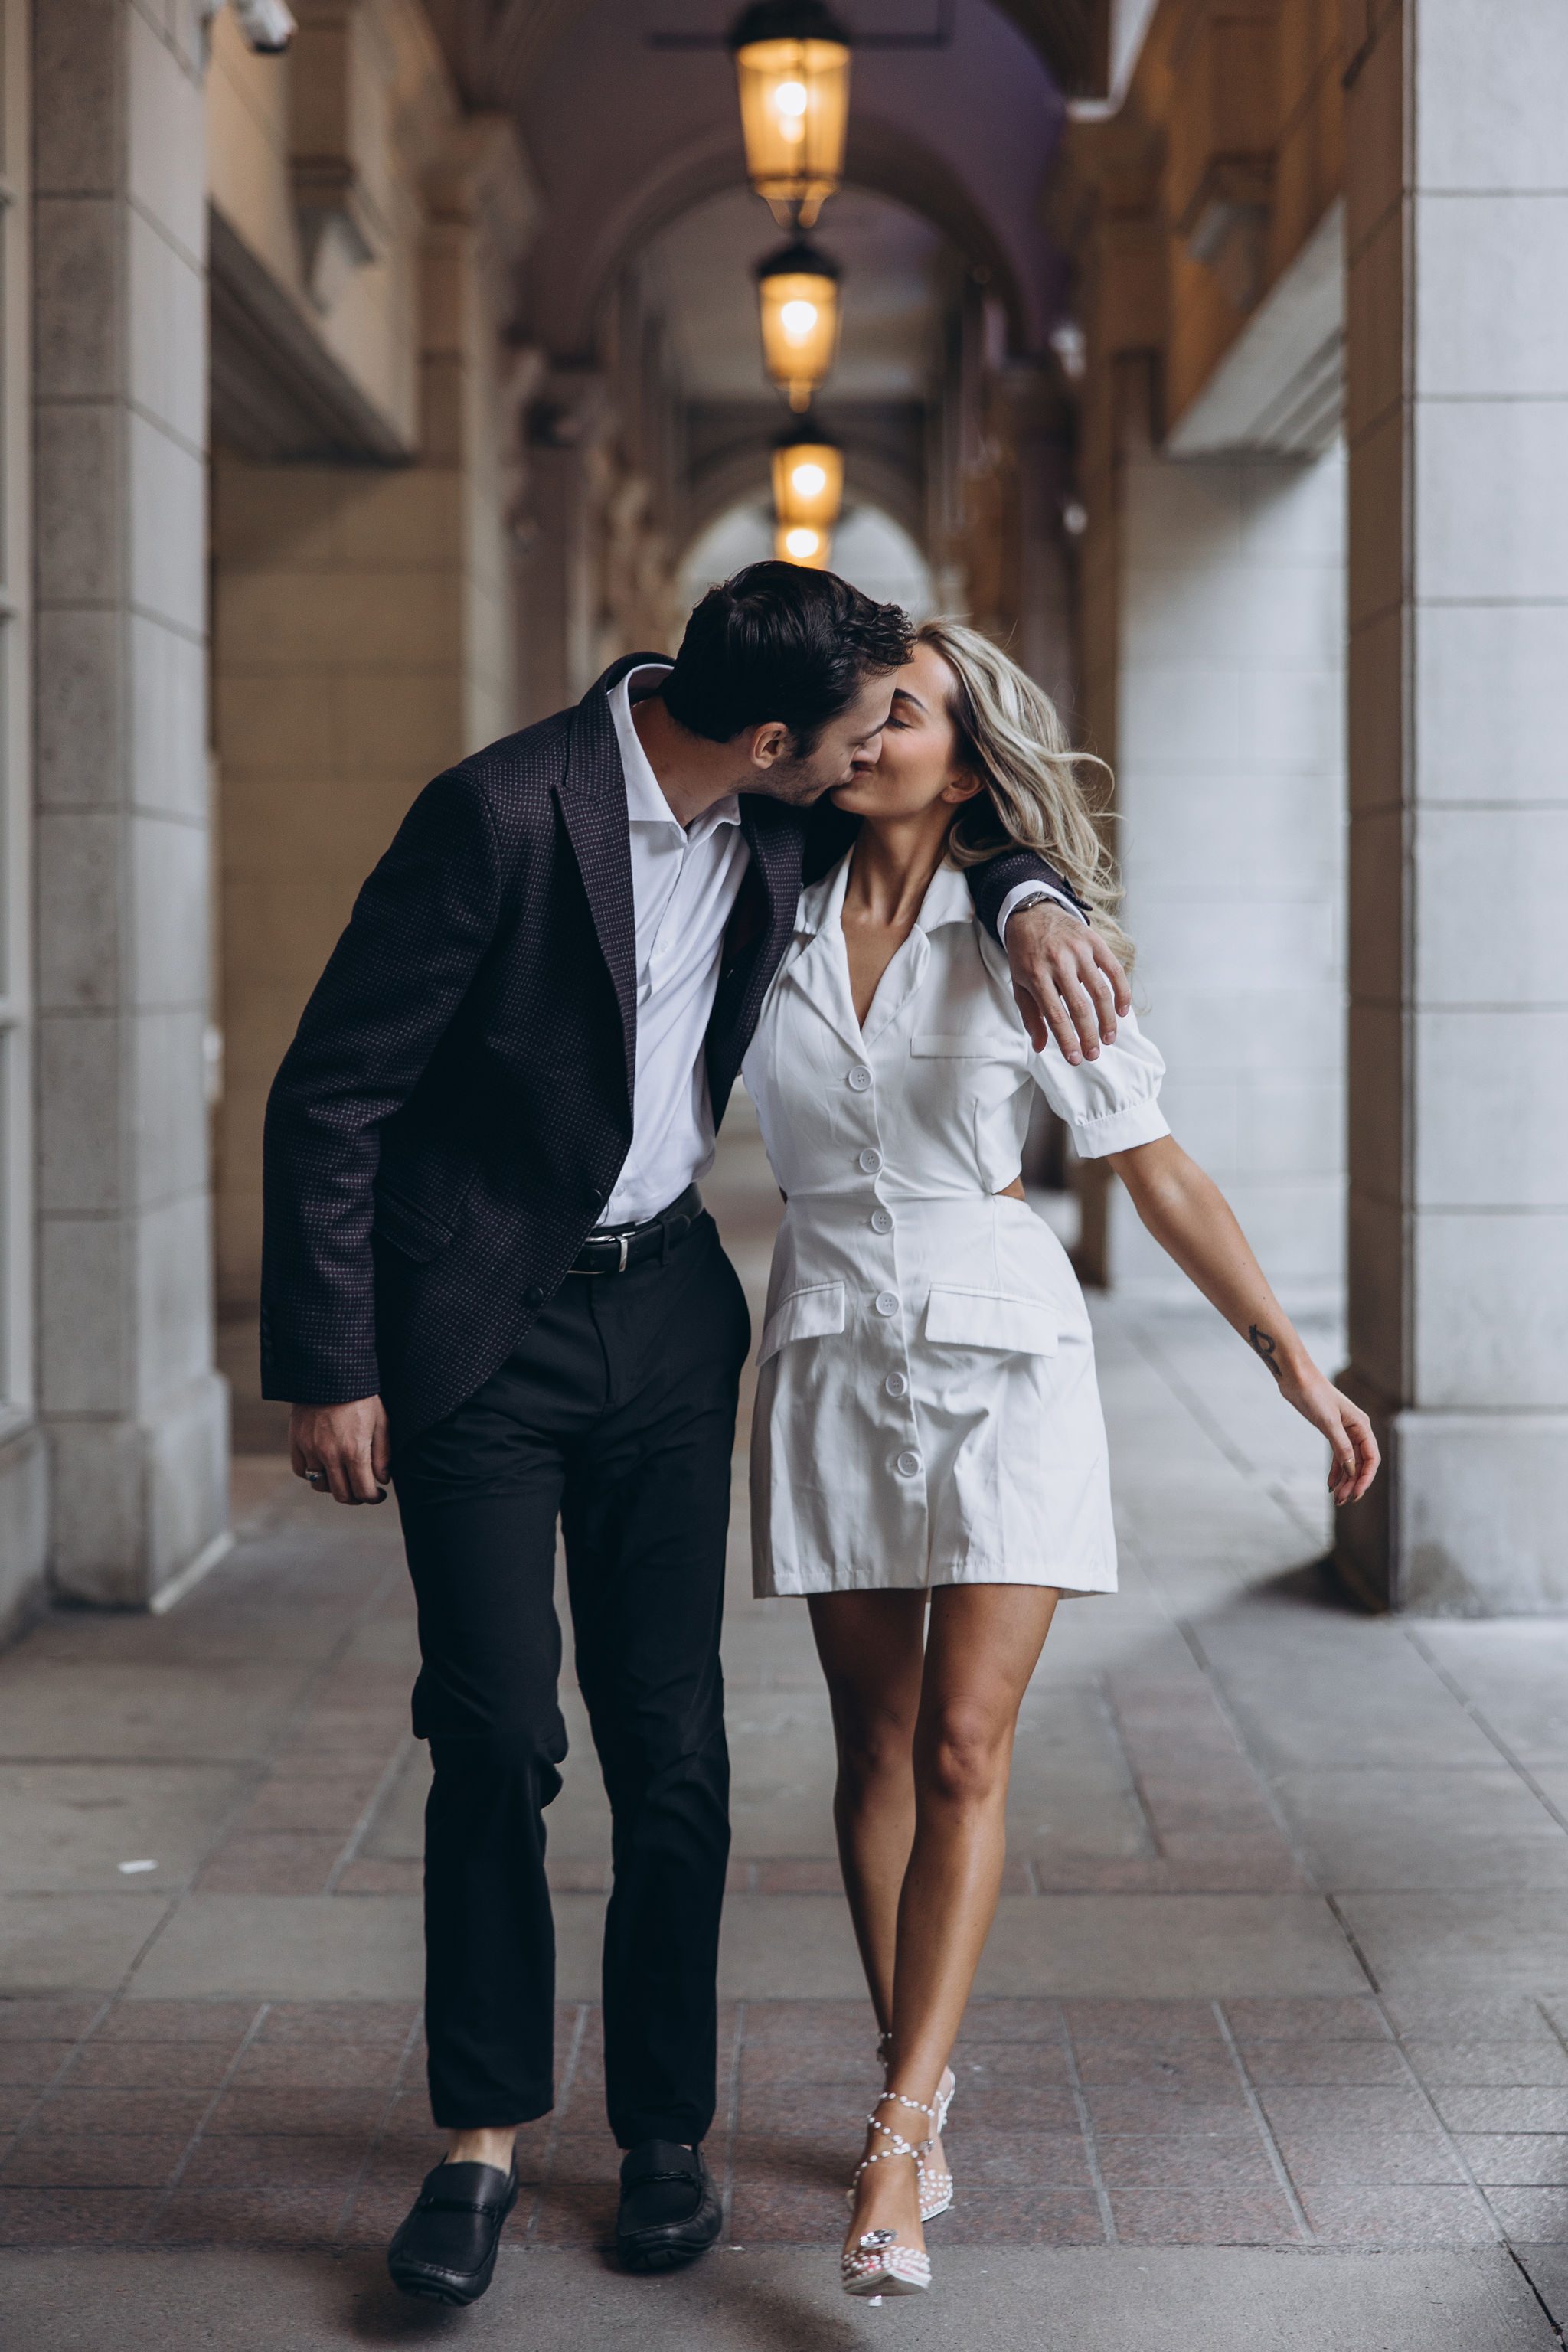 Downtown engagement photoshoot